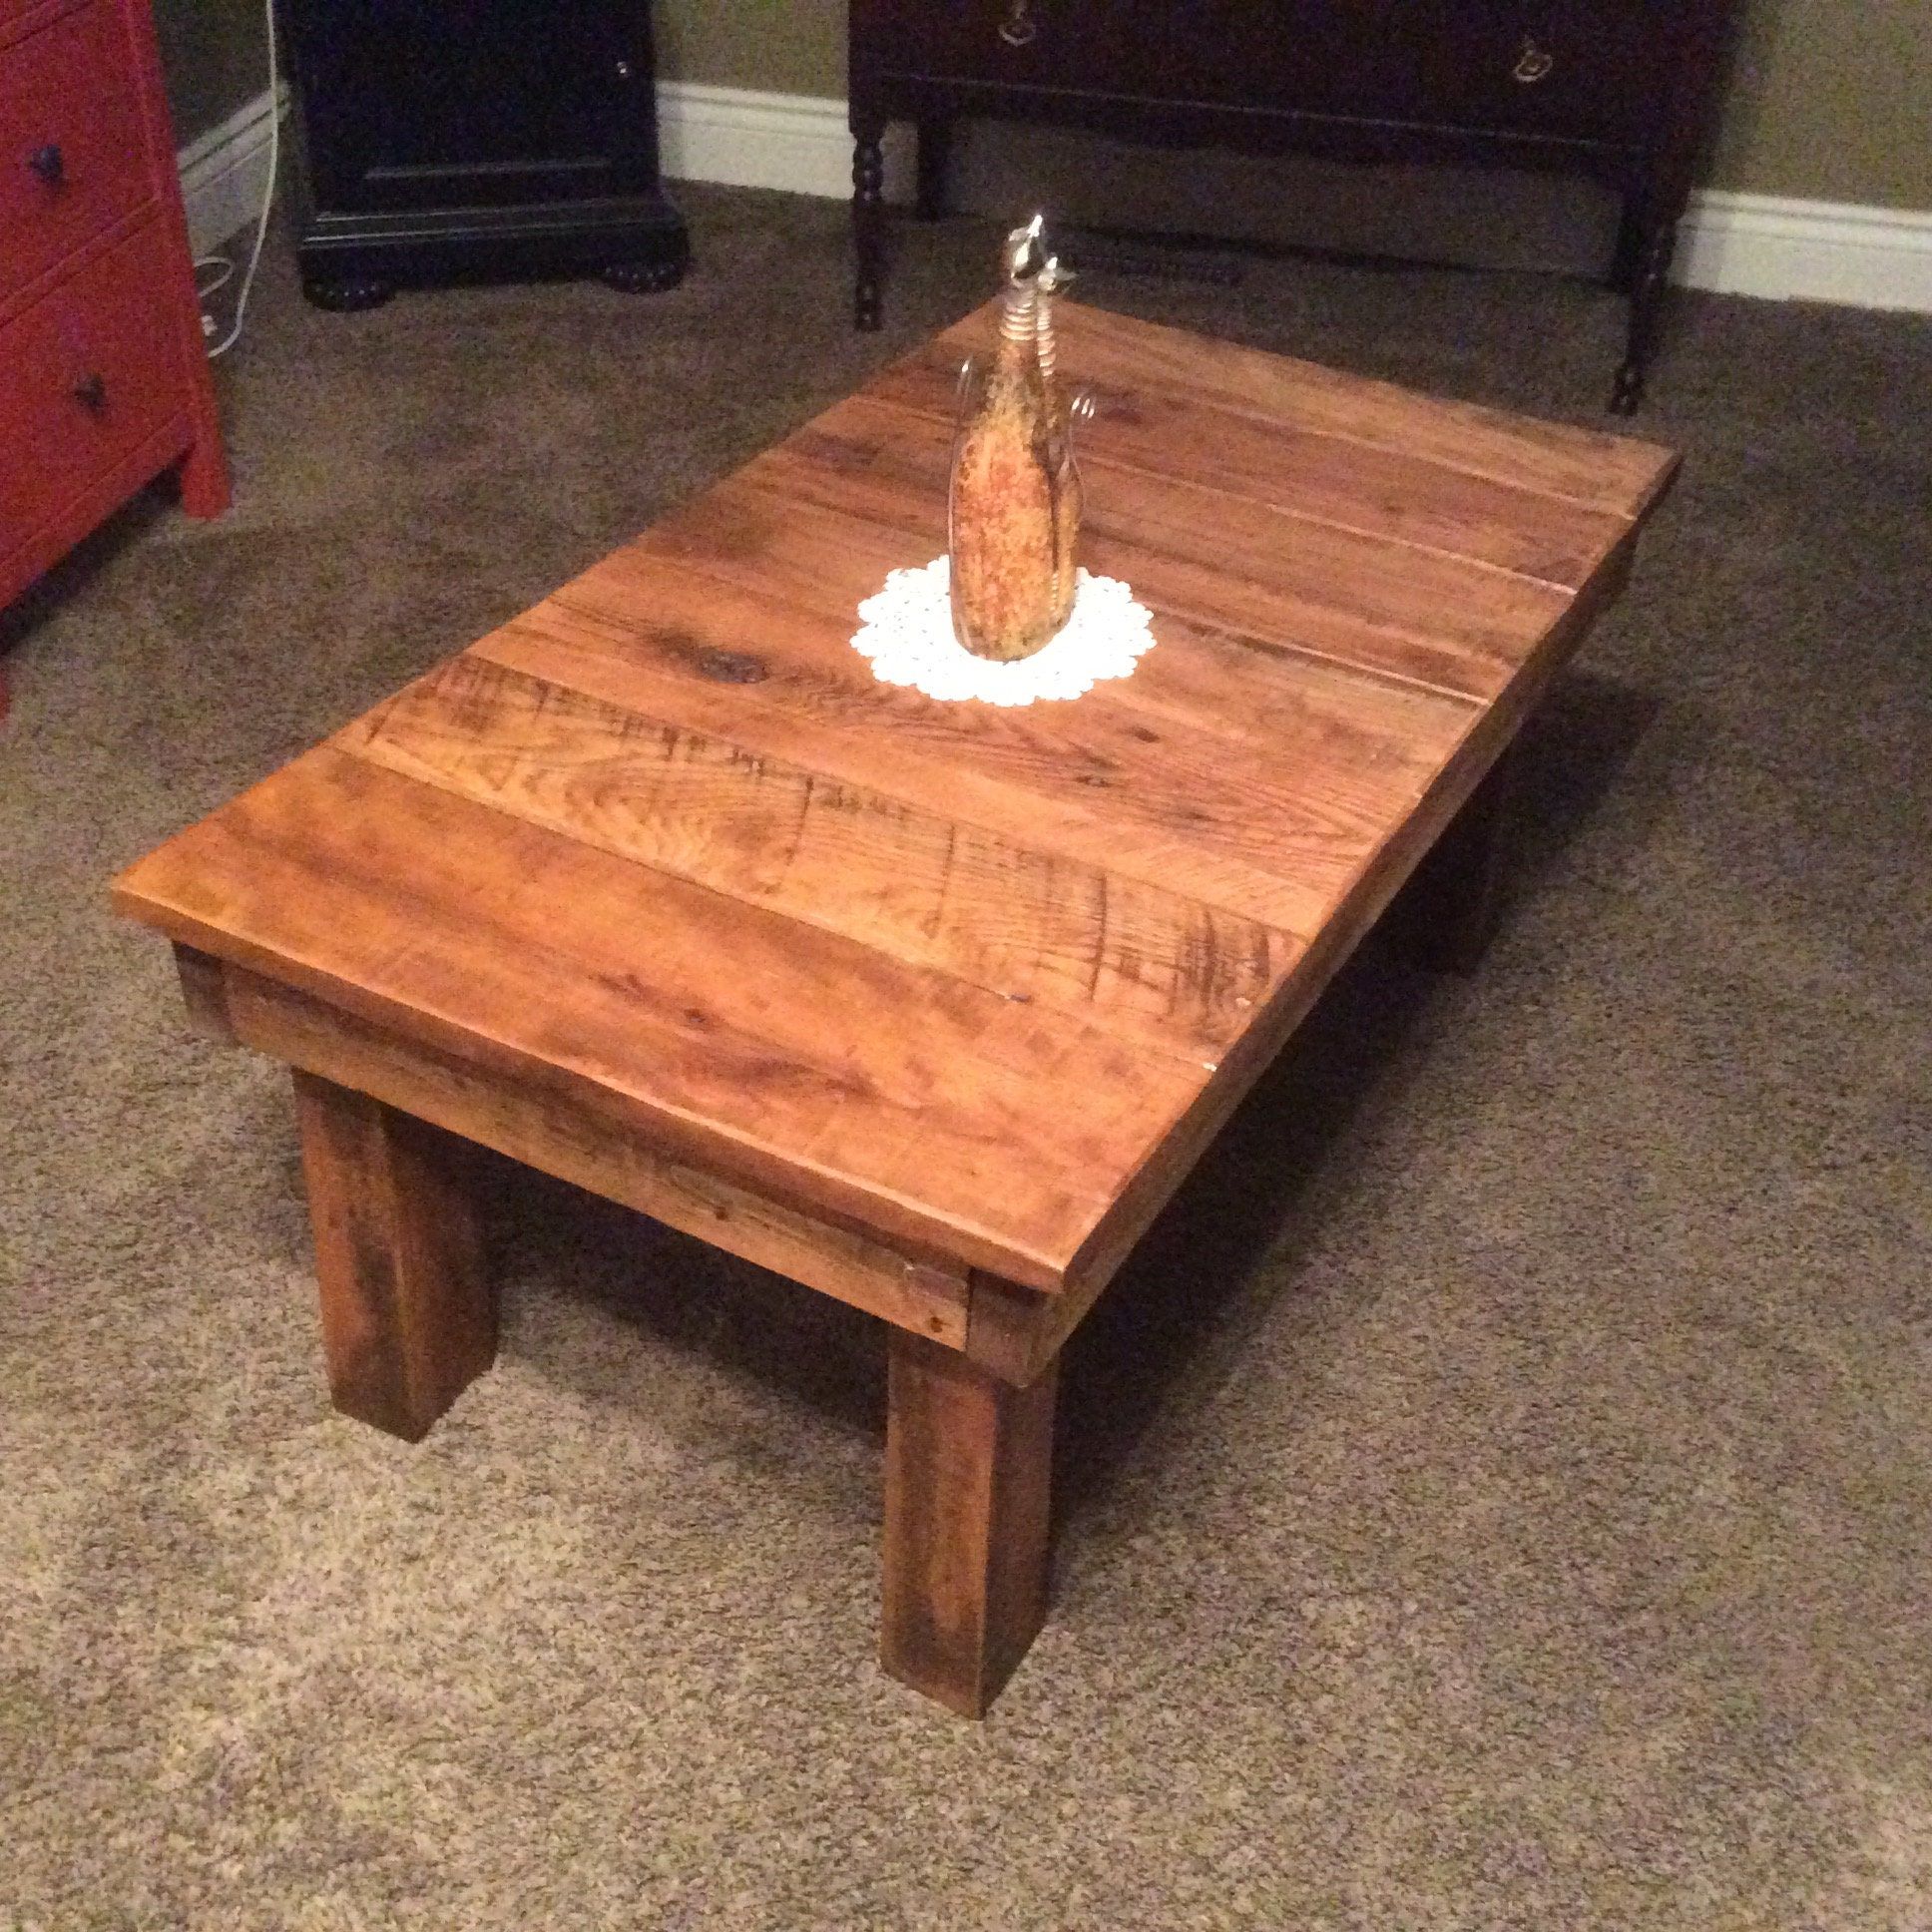 Reclaimed Wood Coffee Tables In Popular Reclaimed Wood Rustic Coffee Table (View 1 of 10)